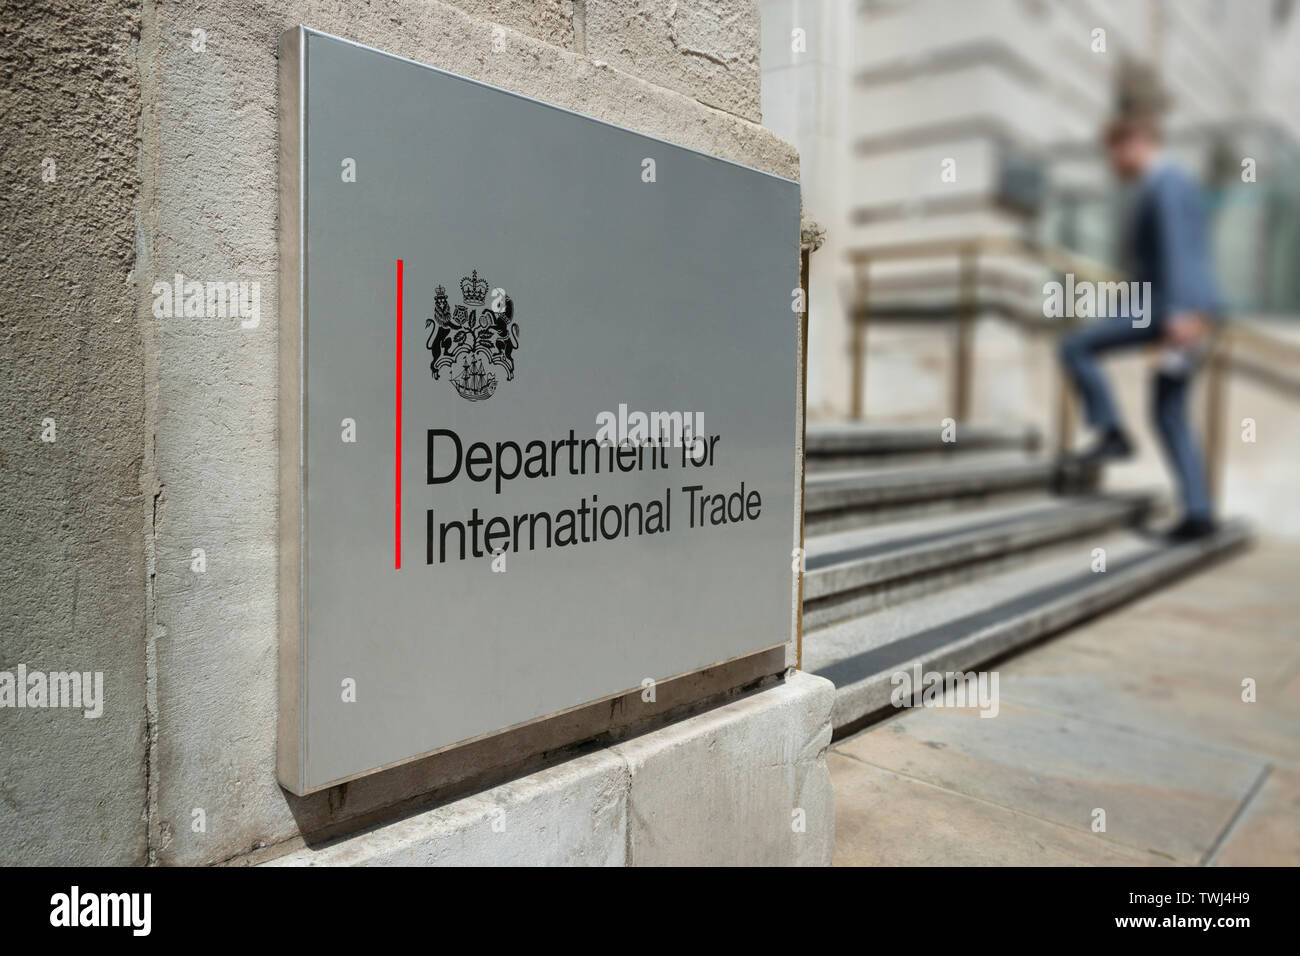 A man enters the Department for International Trade building on Whitehall in London, UK. Stock Photo